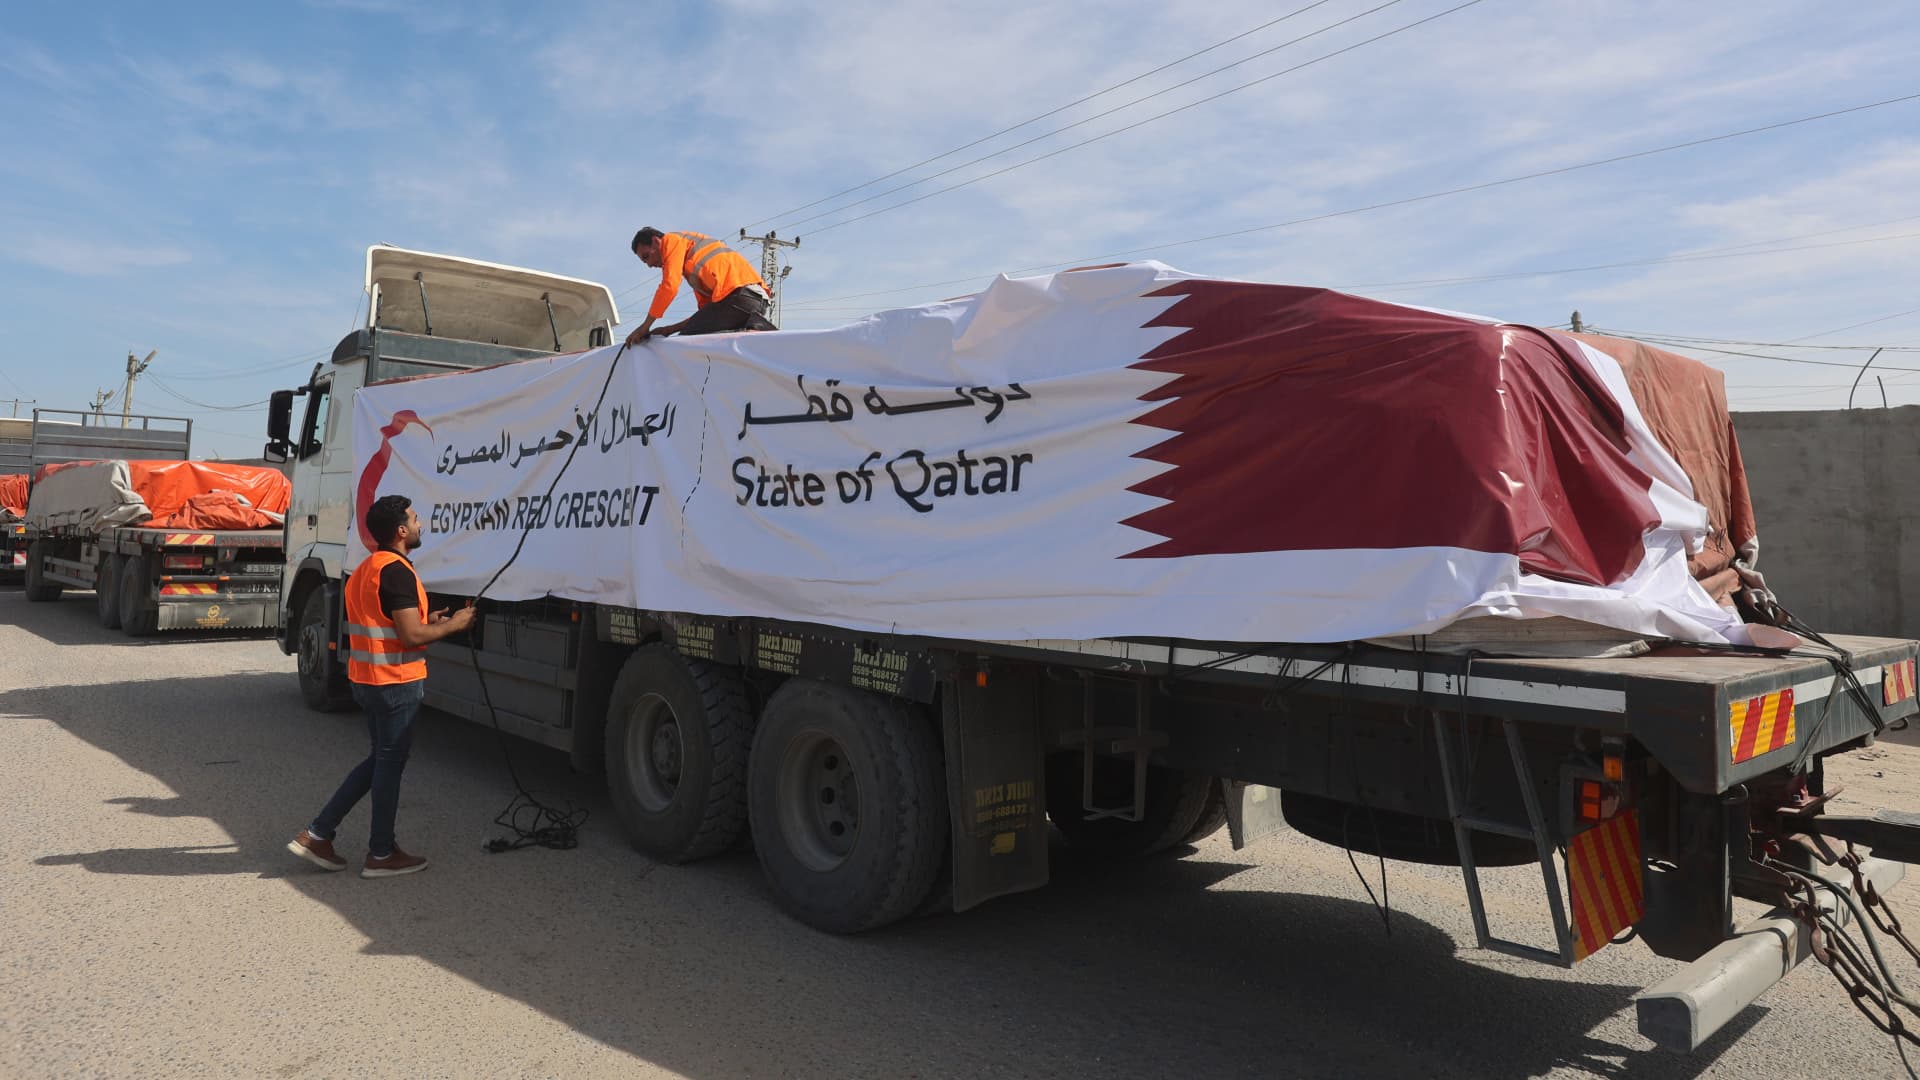 Employees from the Palestinian Red Crescent Society receive the aid convoy from Egyptian side, at Rafah border. United Nations (UN) agences are expected to deliver humanitarian aid to those in need in various areas of the Gaza Strip, Gaza government media office said on Saturday. 